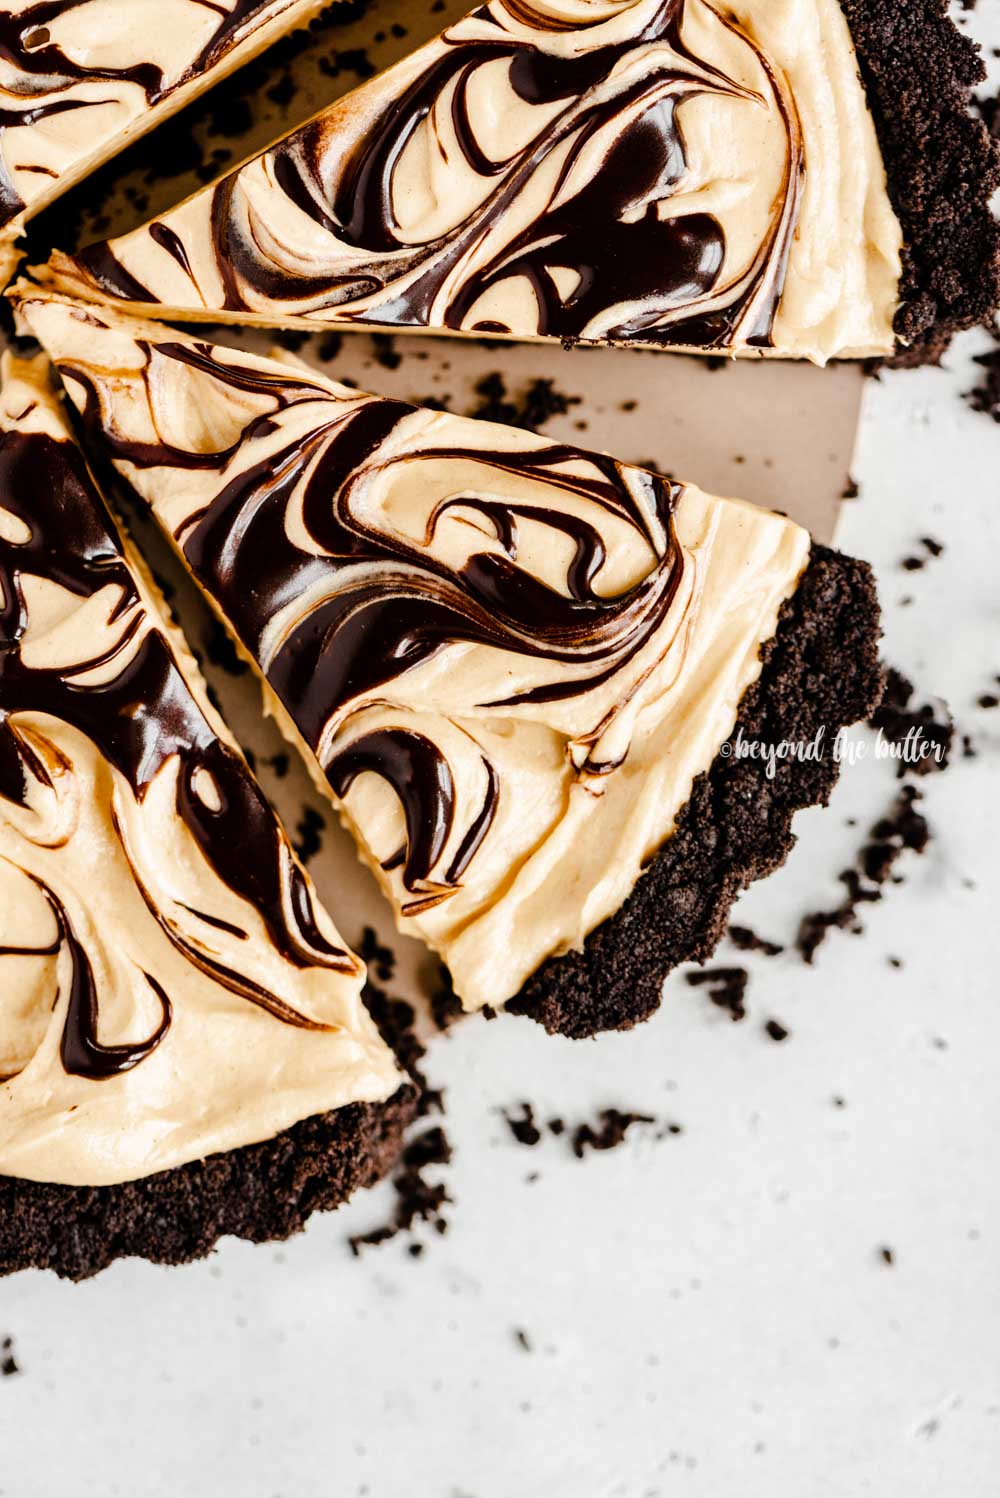 Overhead image of sliced chocolate peanut butter swirl tart | All Images © Beyond the Butter™